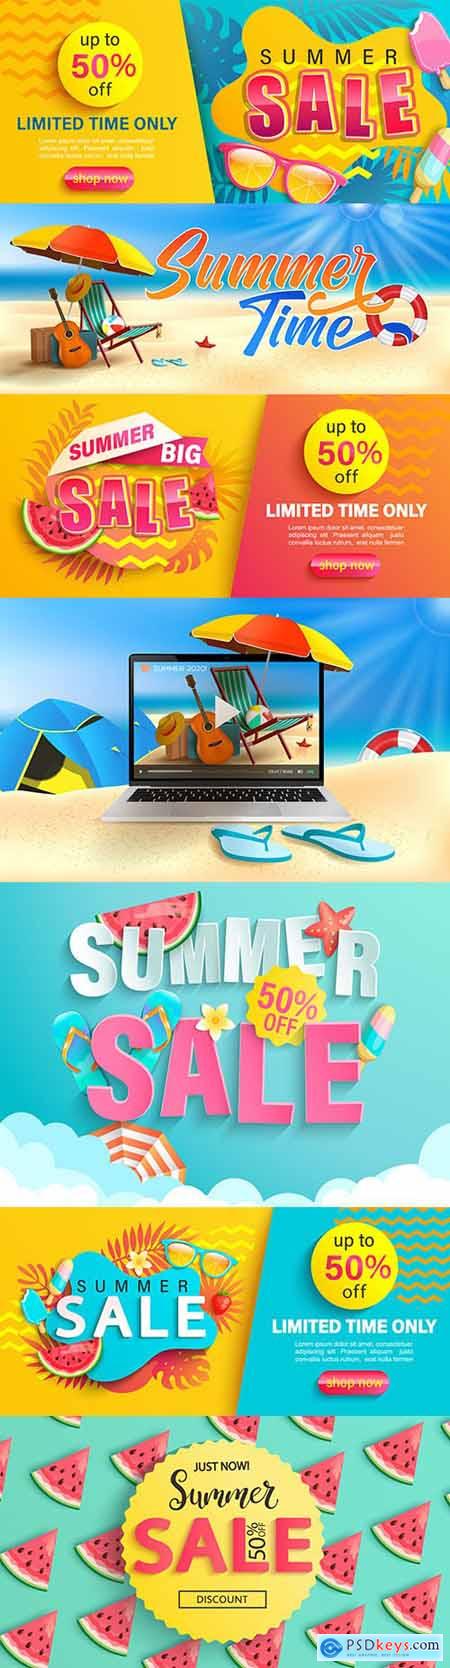 Summer sale discount up to 50% promo promotion